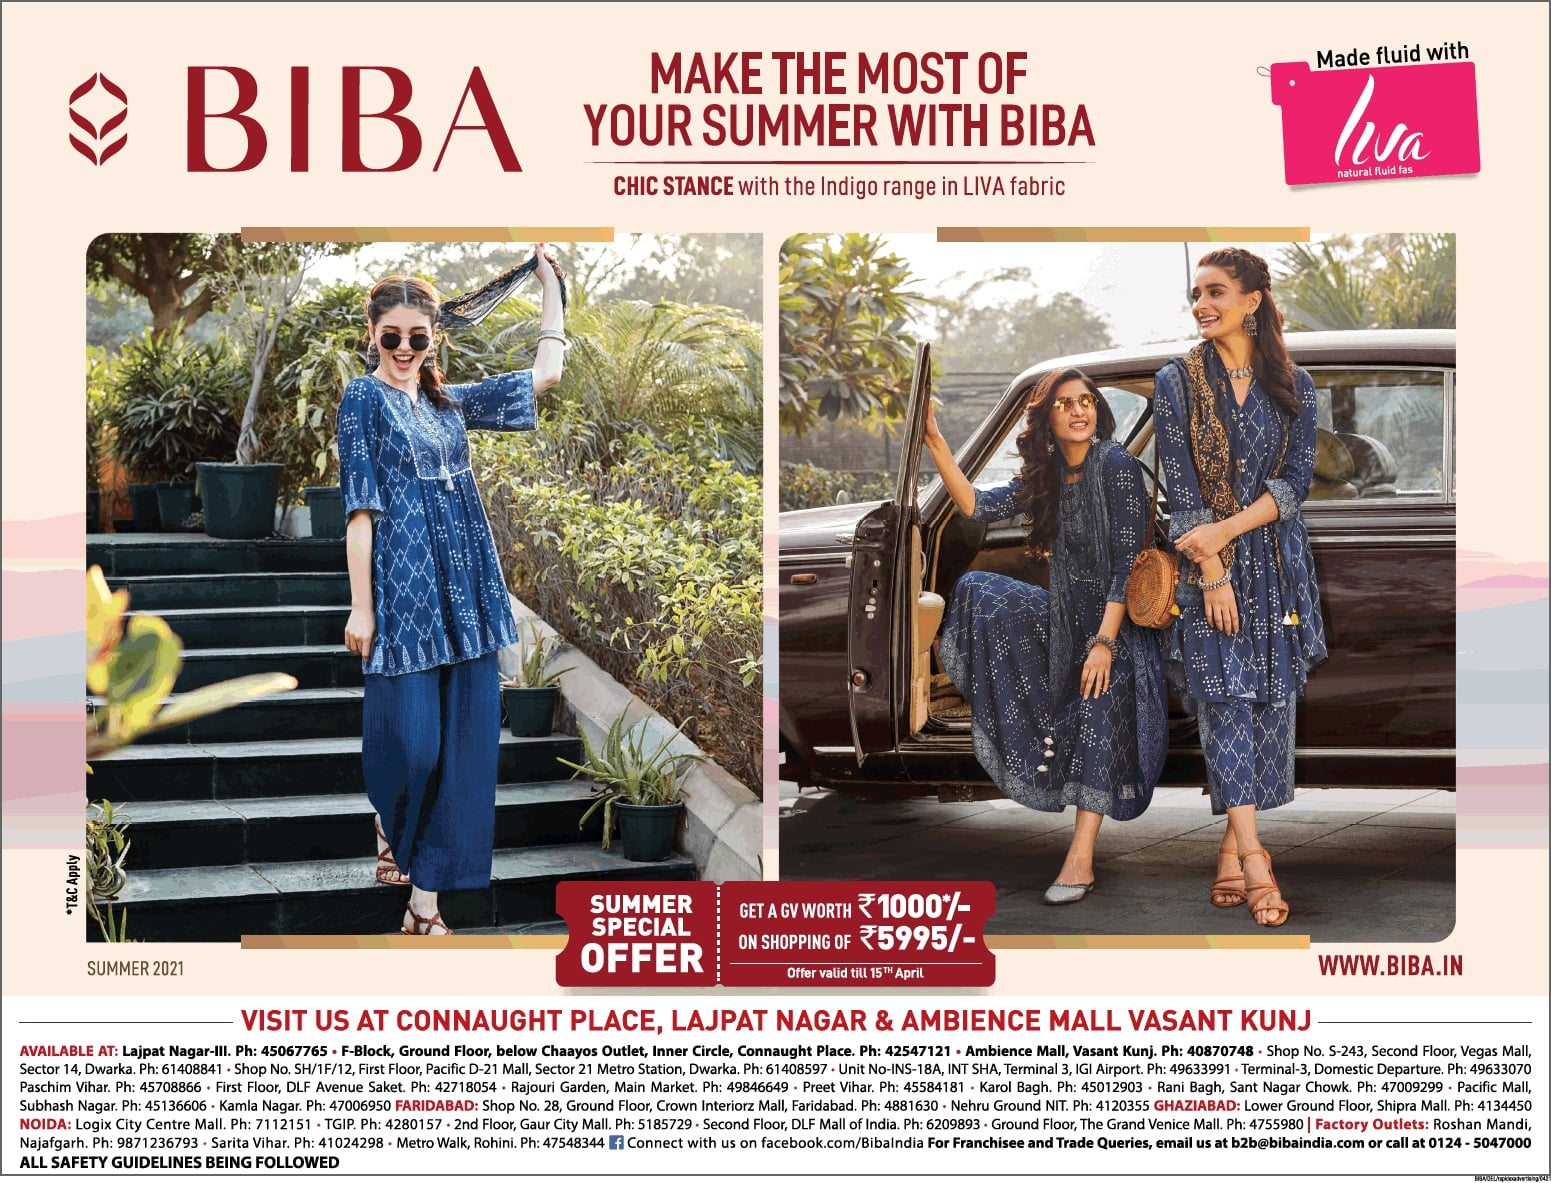 biba-make-the-most-of-your-summer-with-biba-ad-delhi-times-09-04-2021